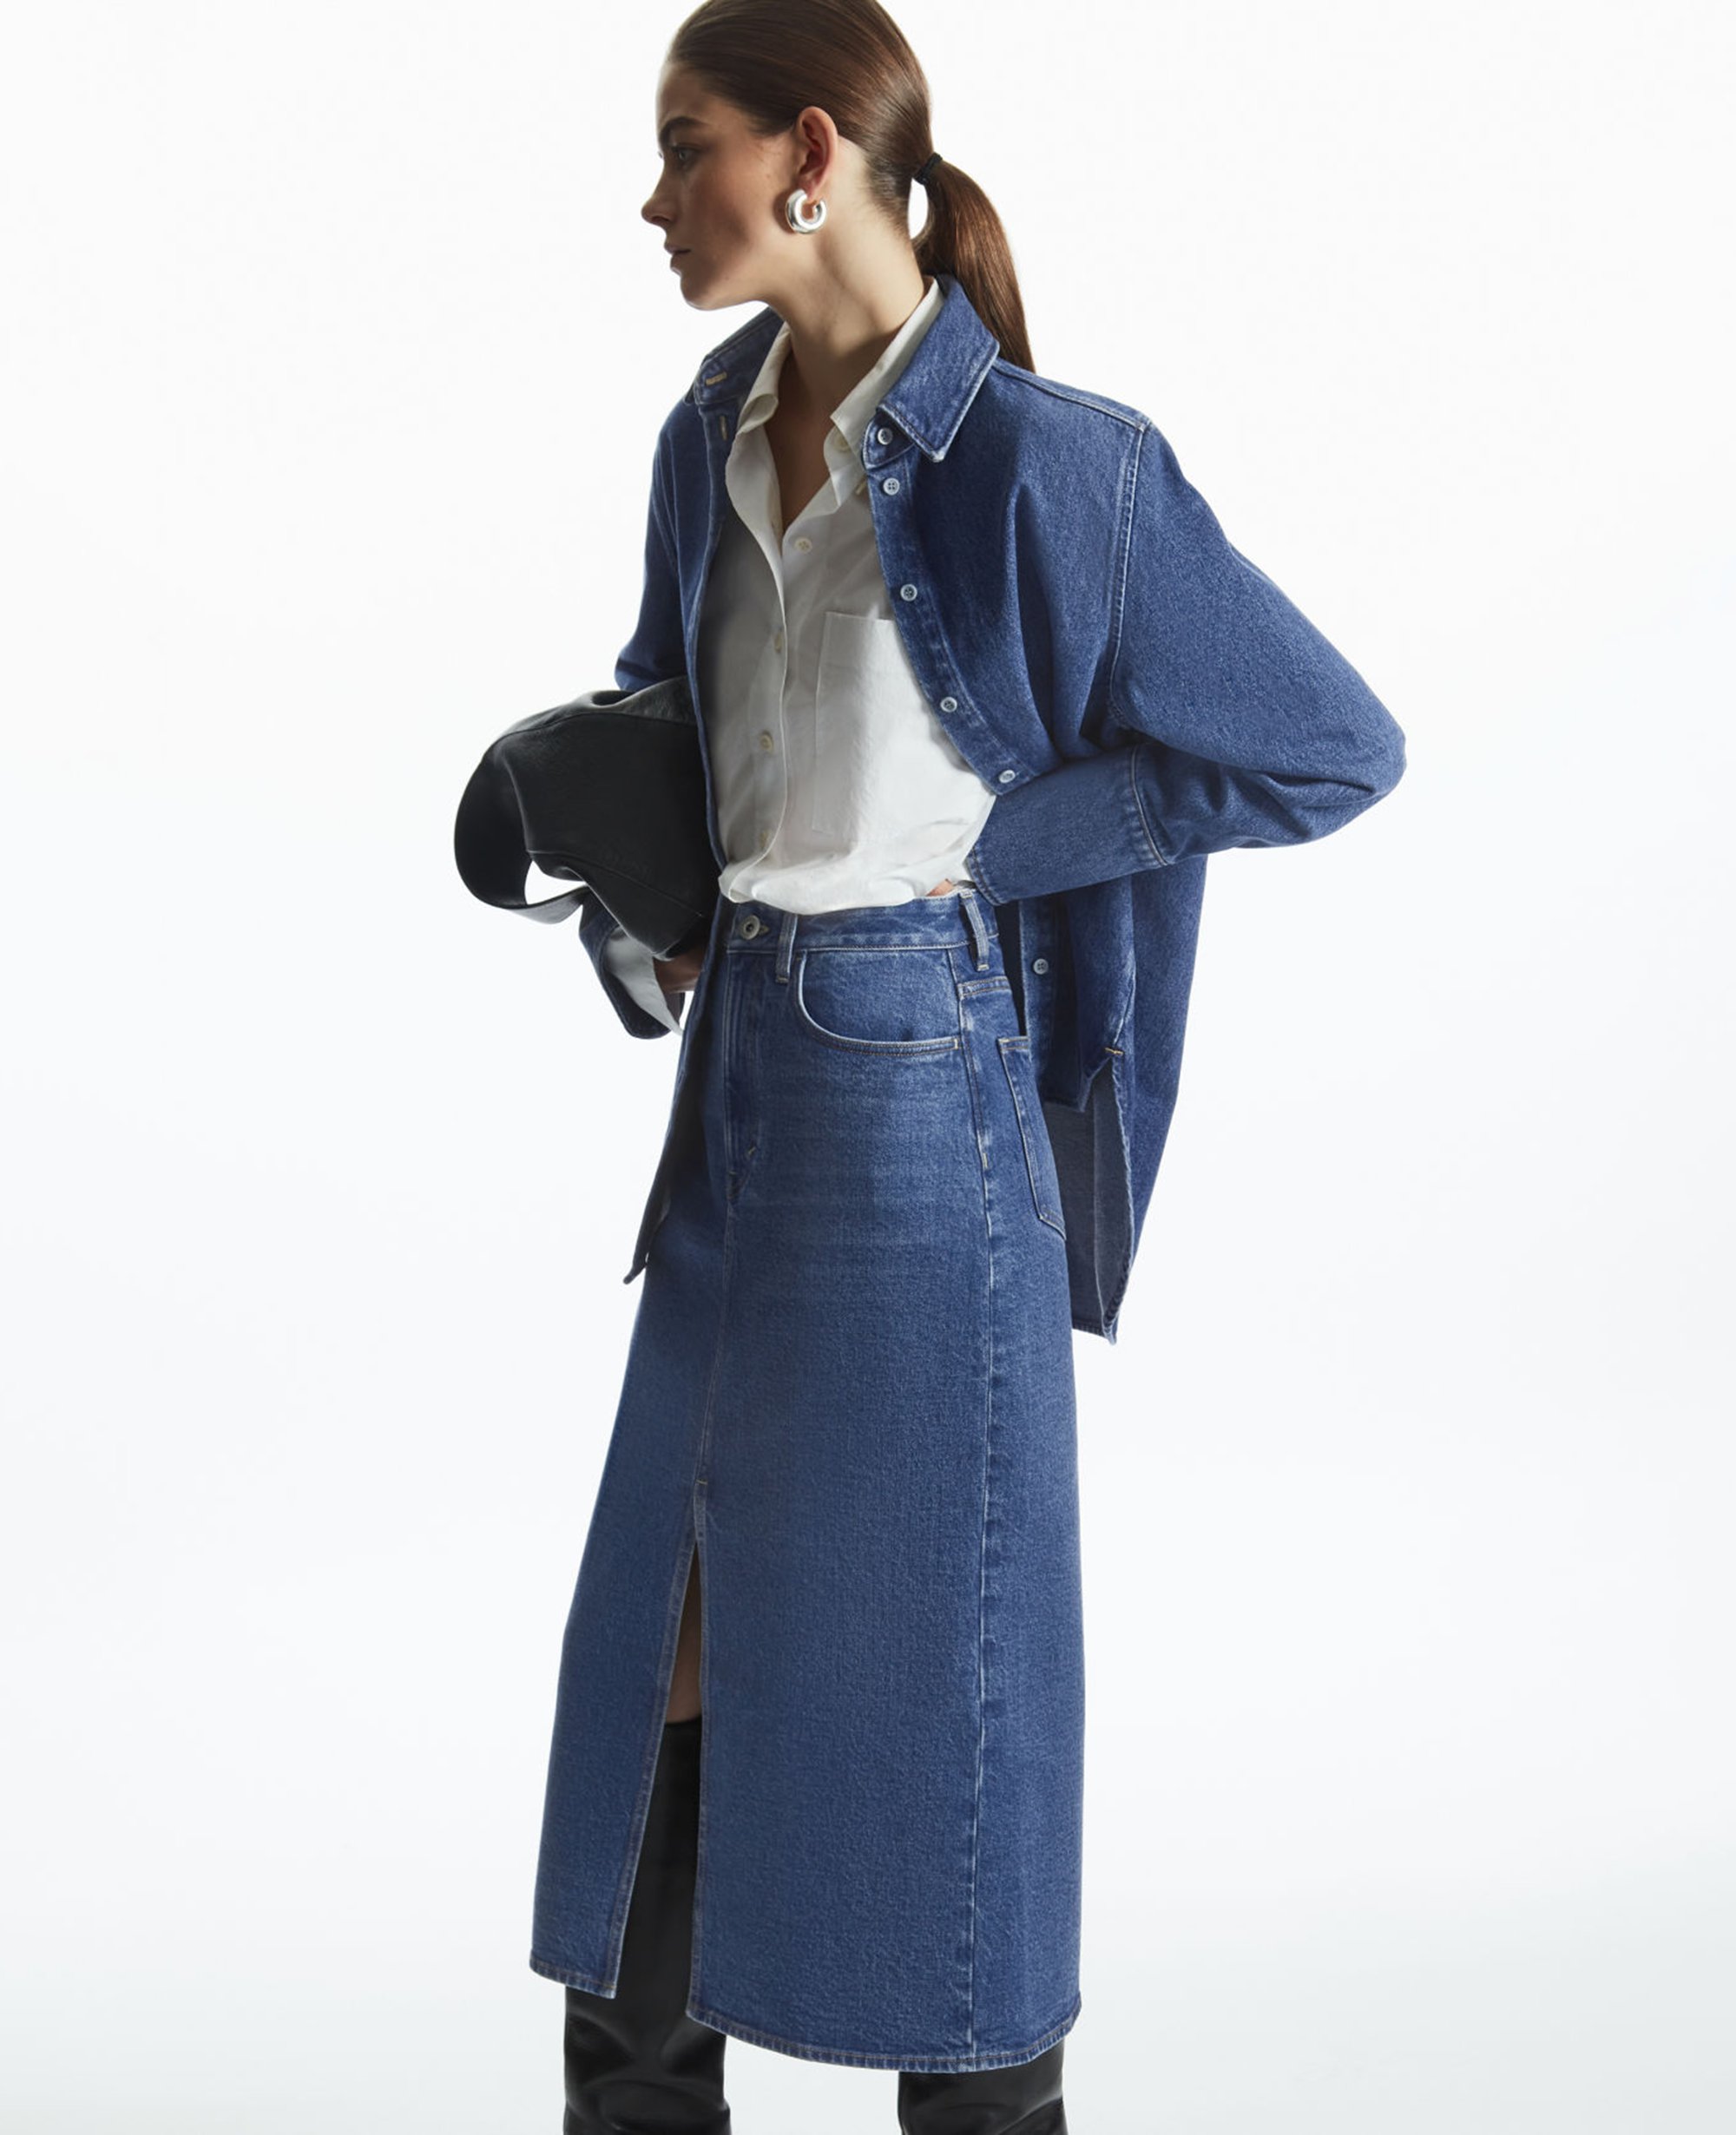 Maxi skirts are everywhere: Shop denim, knit and more fall skirt